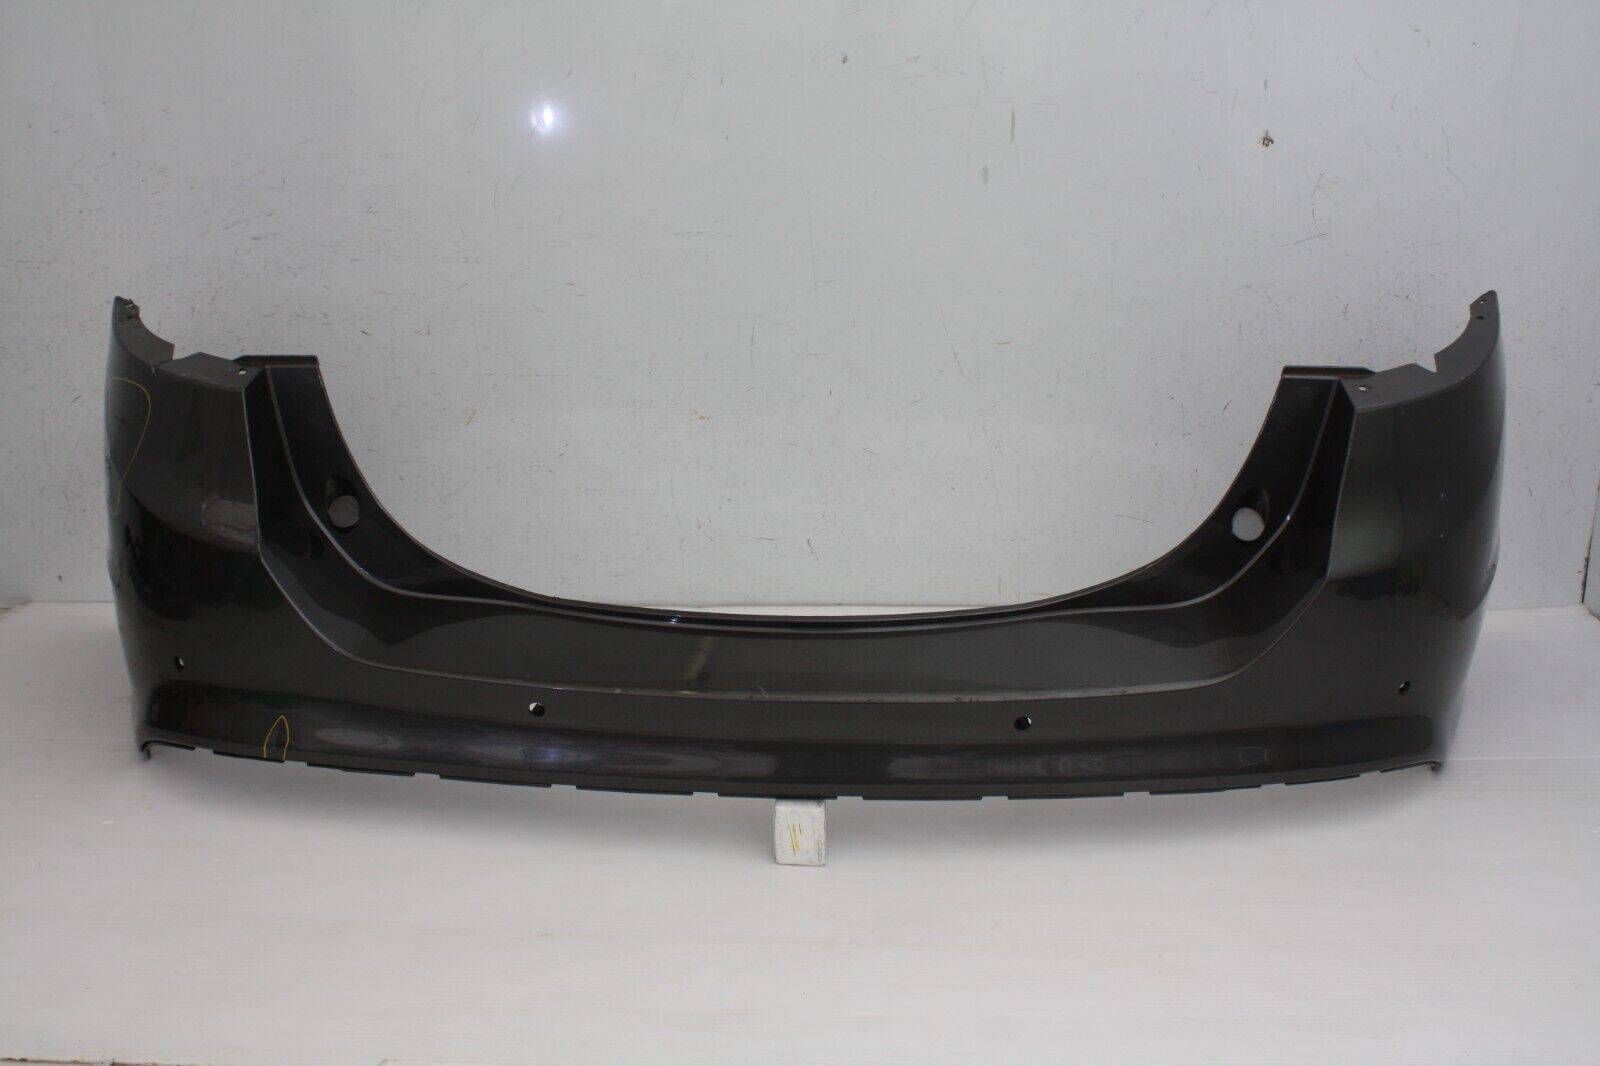 Ford Mondeo Rear Bumper 2015 TO 2019 DS73 17906 M Genuine 175757321772